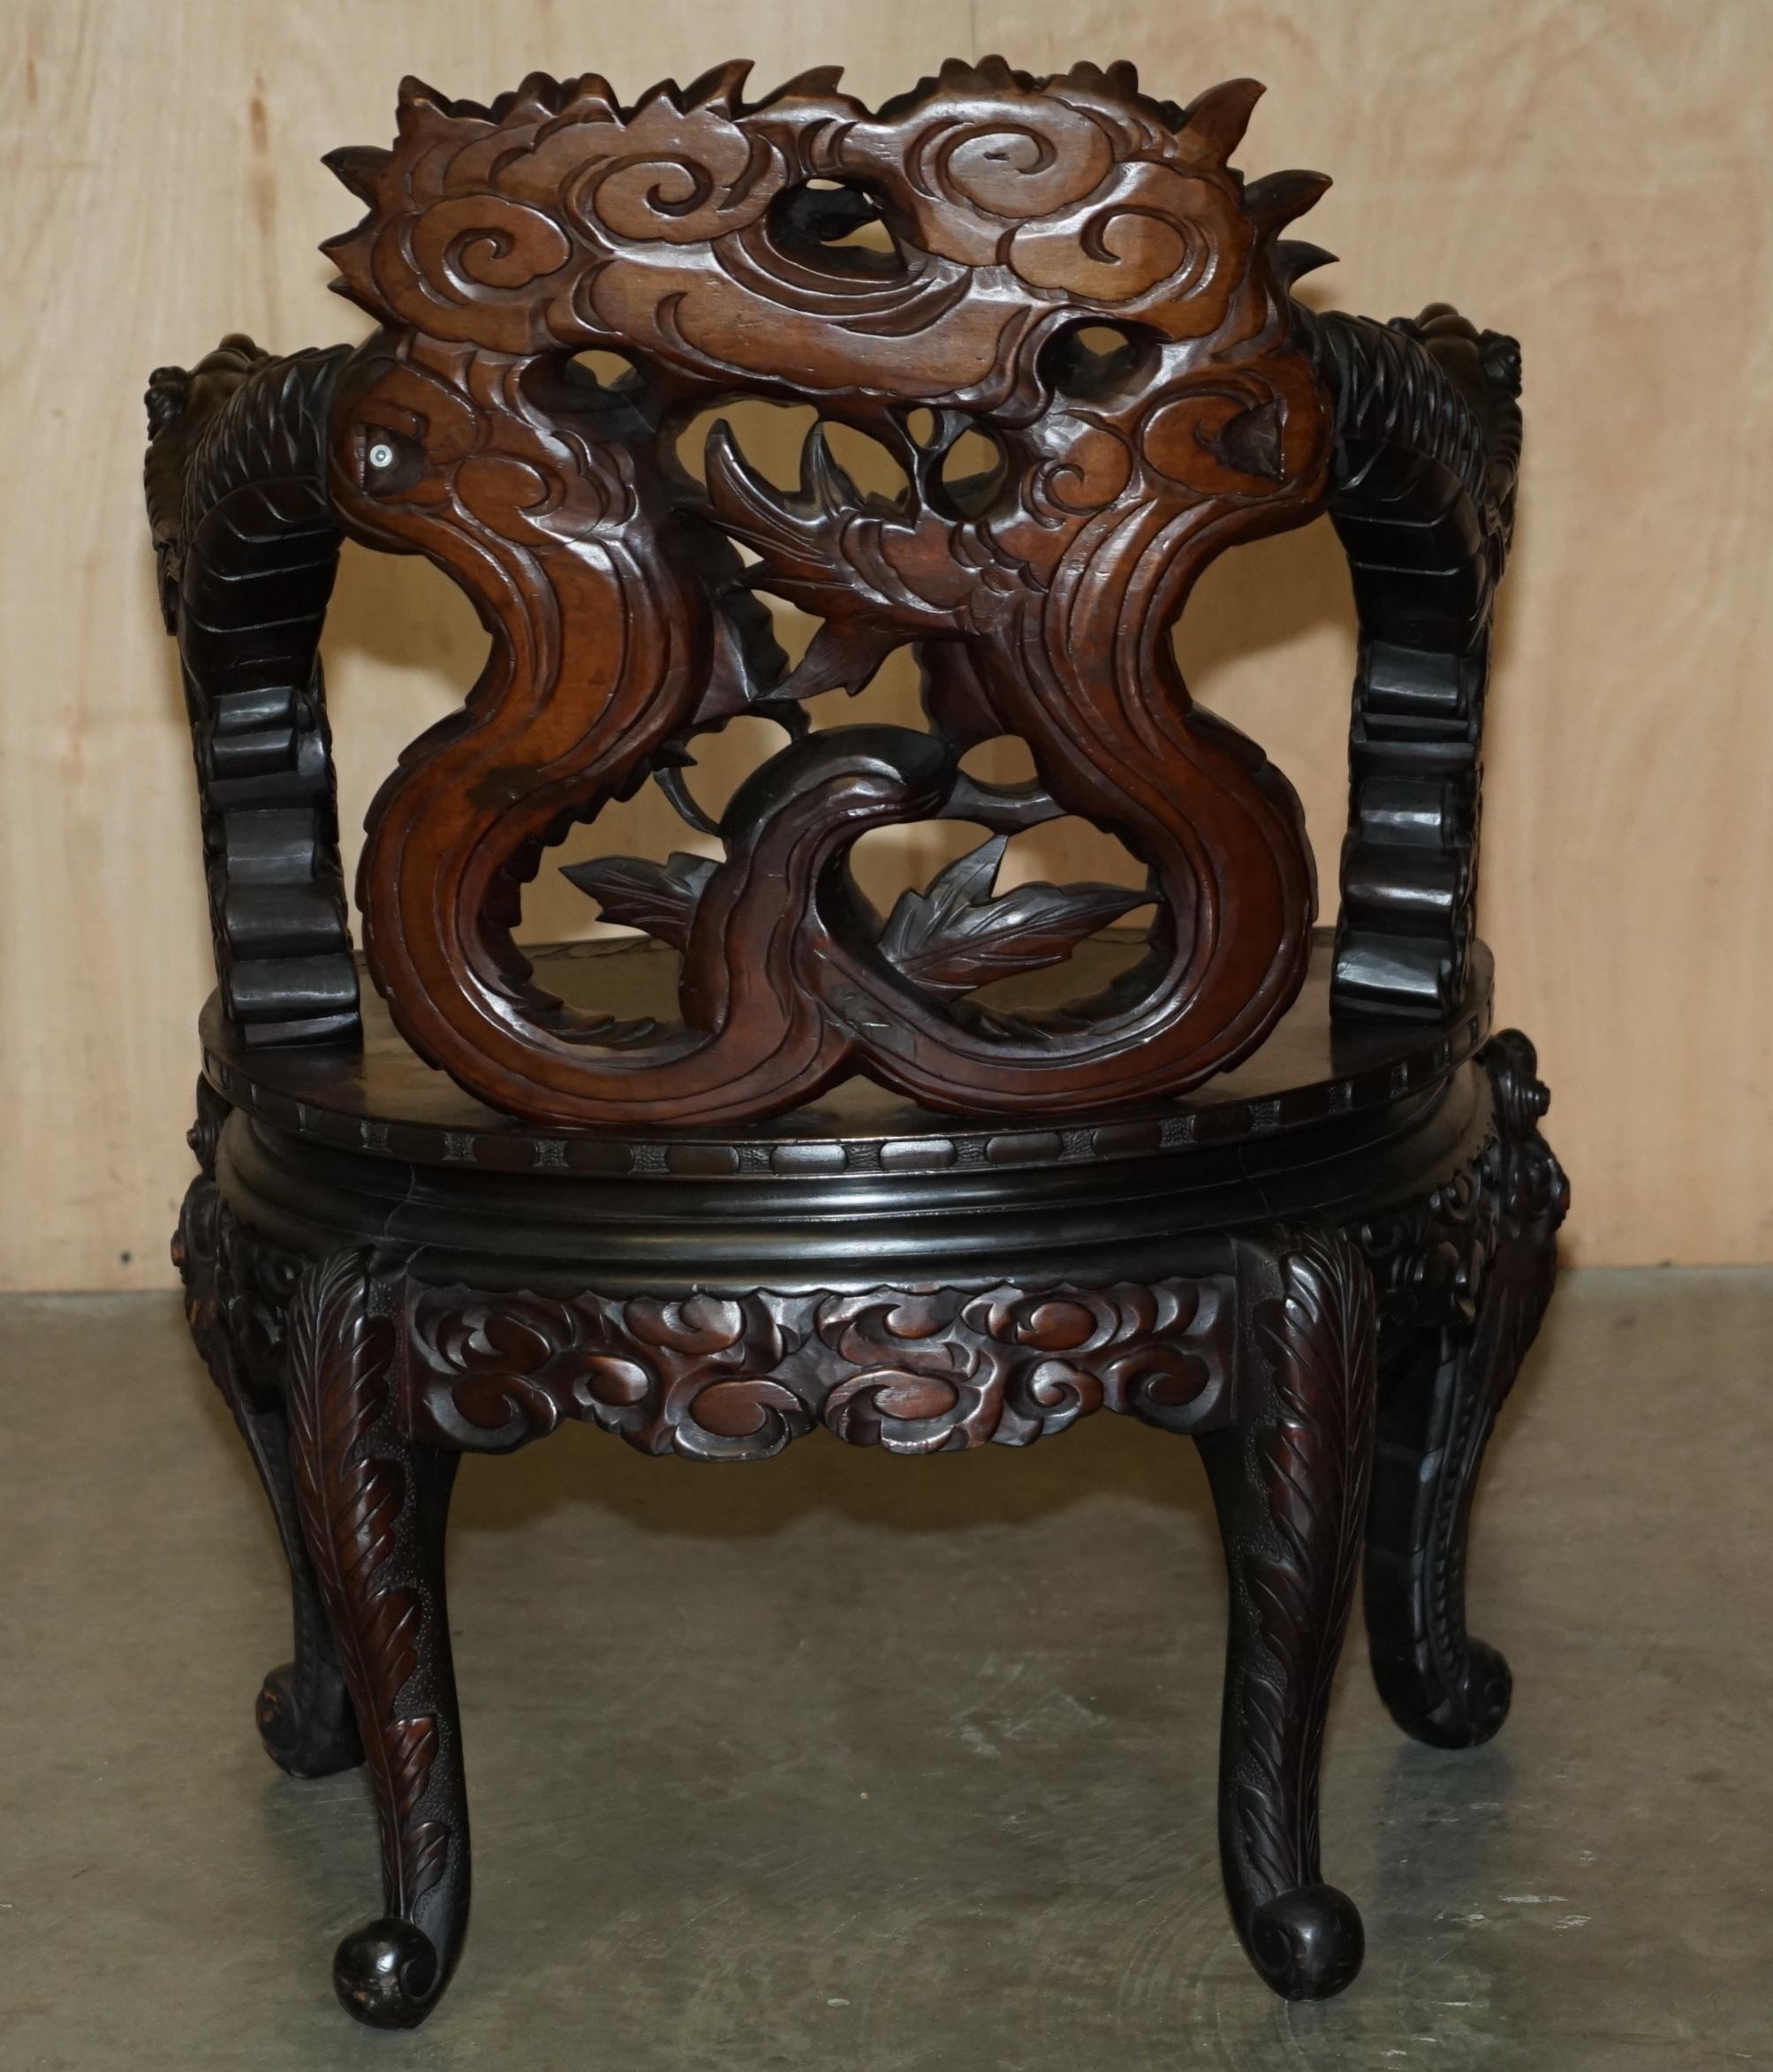 EXQUISITE CIRCA 1880 QING DYNASTY CARVED HARDWOOD CHINESE DRAGON ARMCHAiR For Sale 9